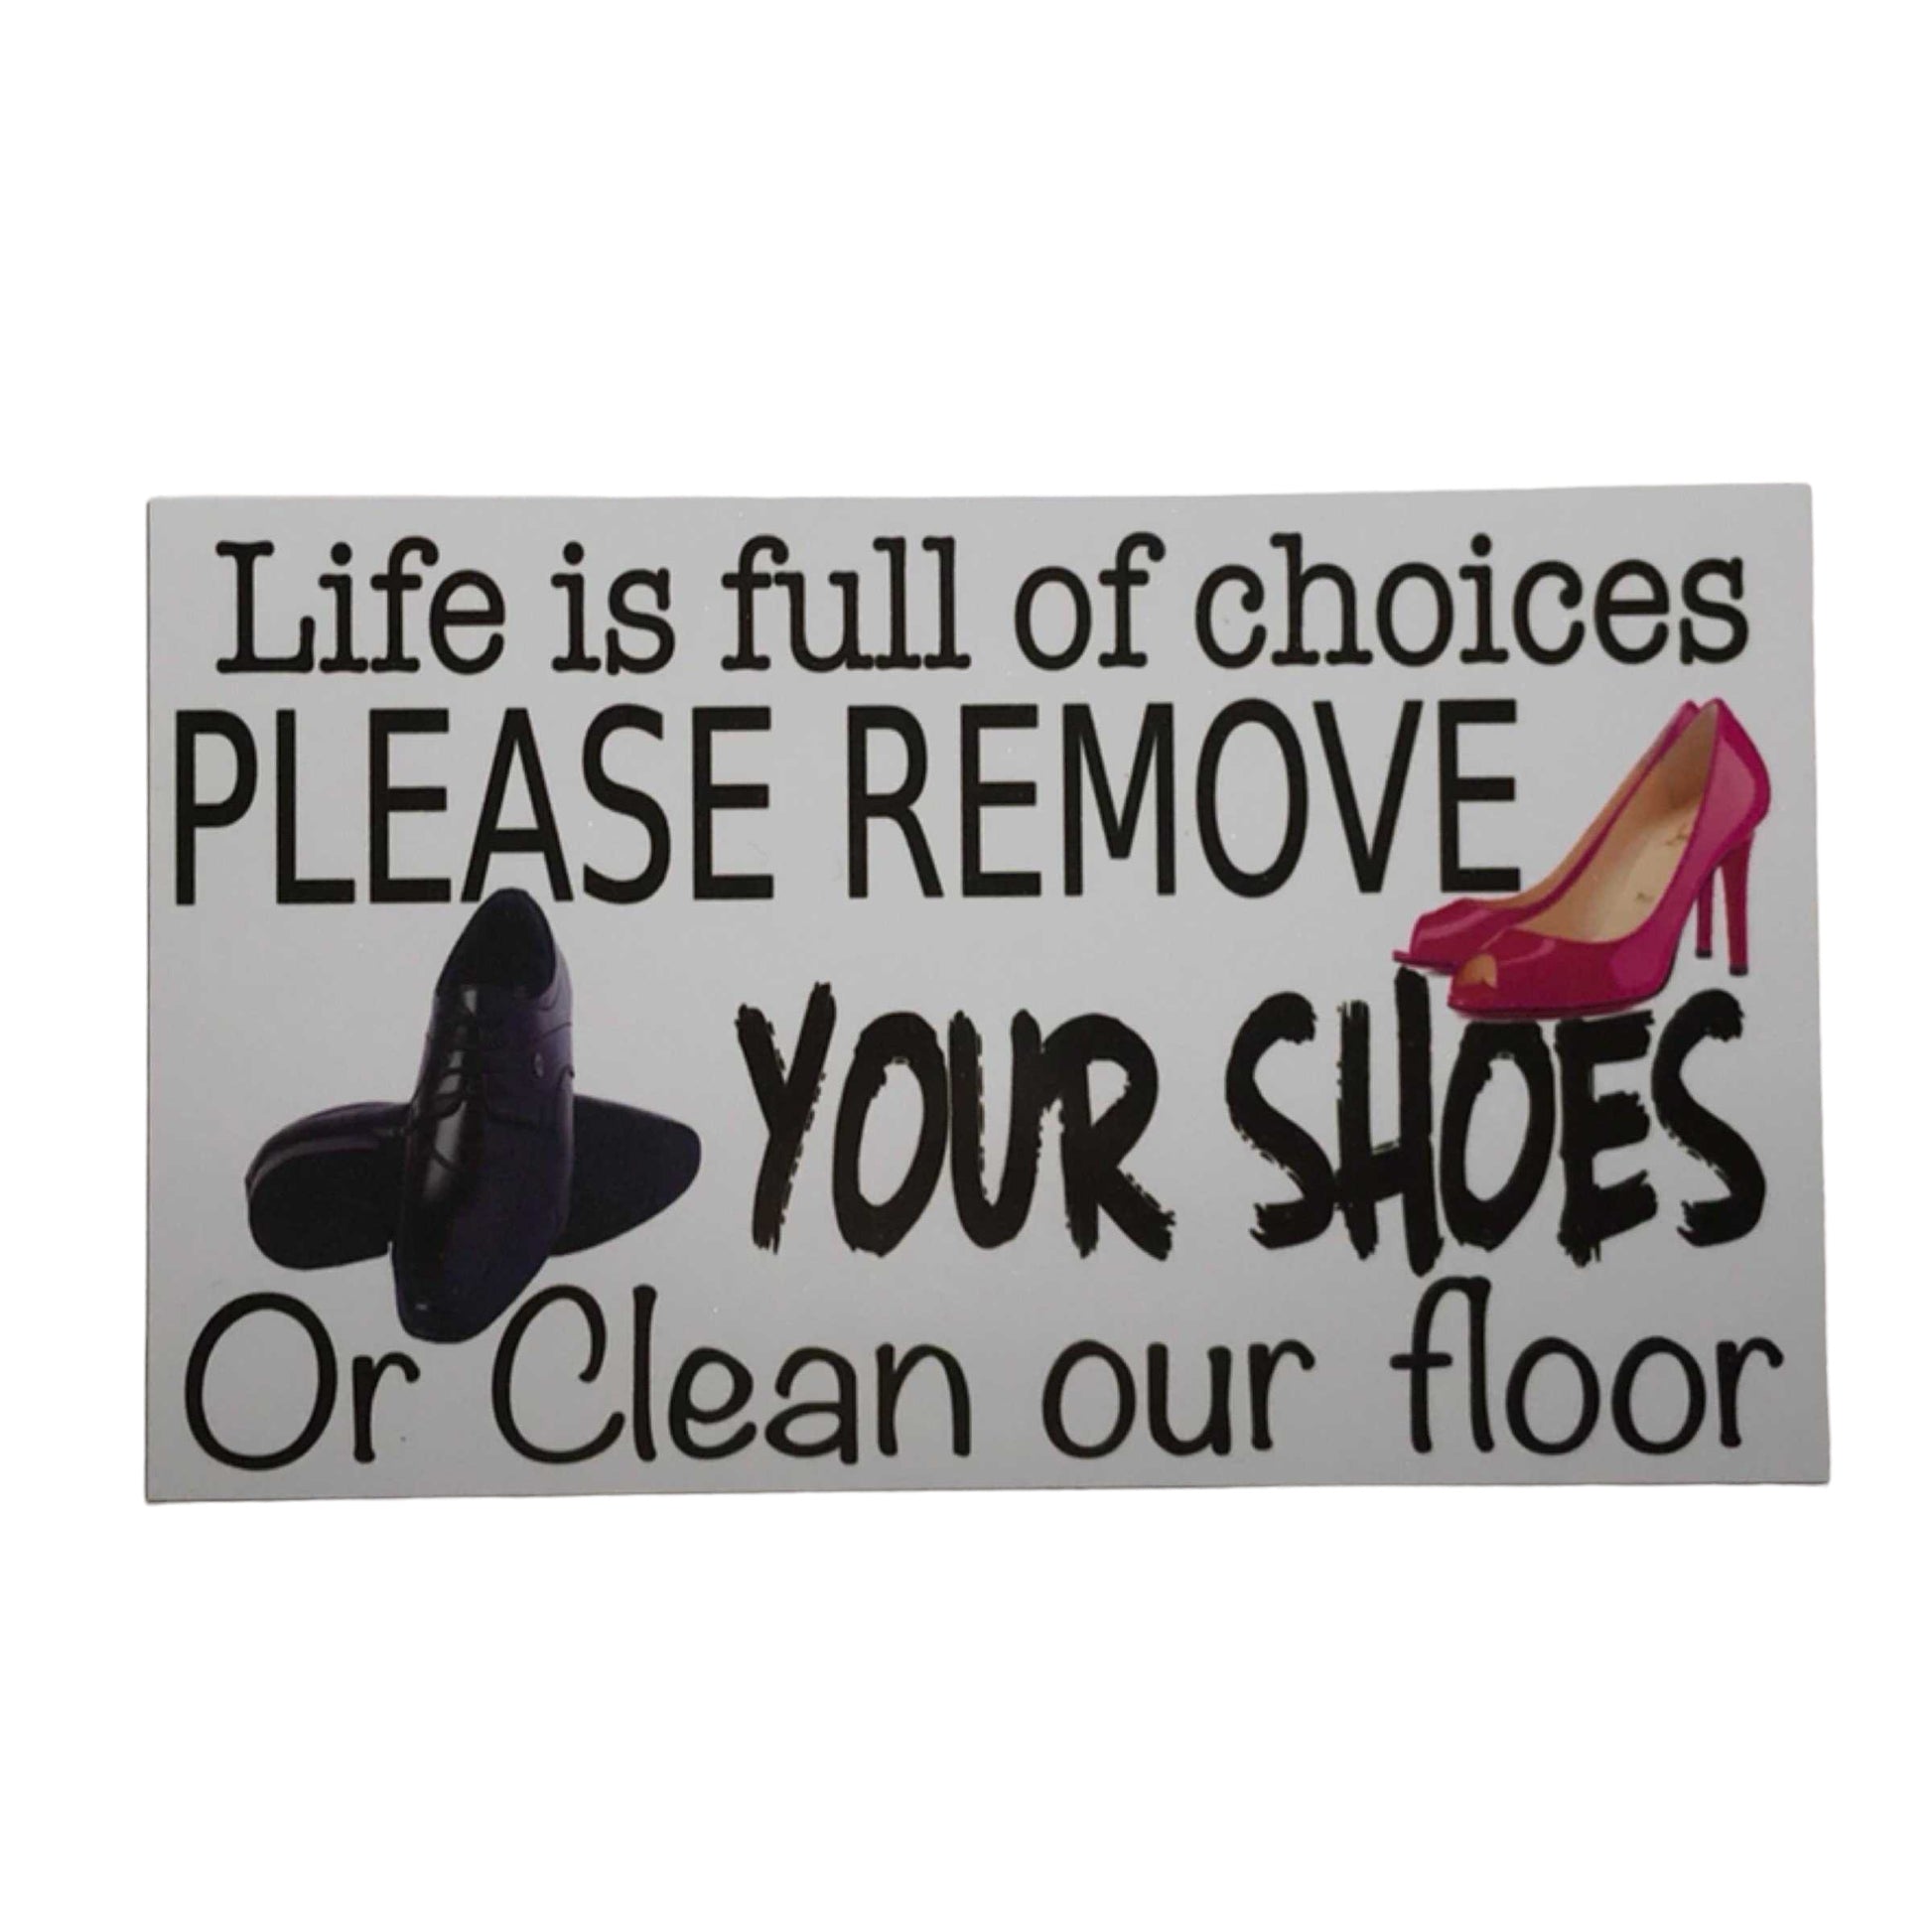 Life Choices Remove Your Shoes Or Clean Floor Sign - The Renmy Store Homewares & Gifts 